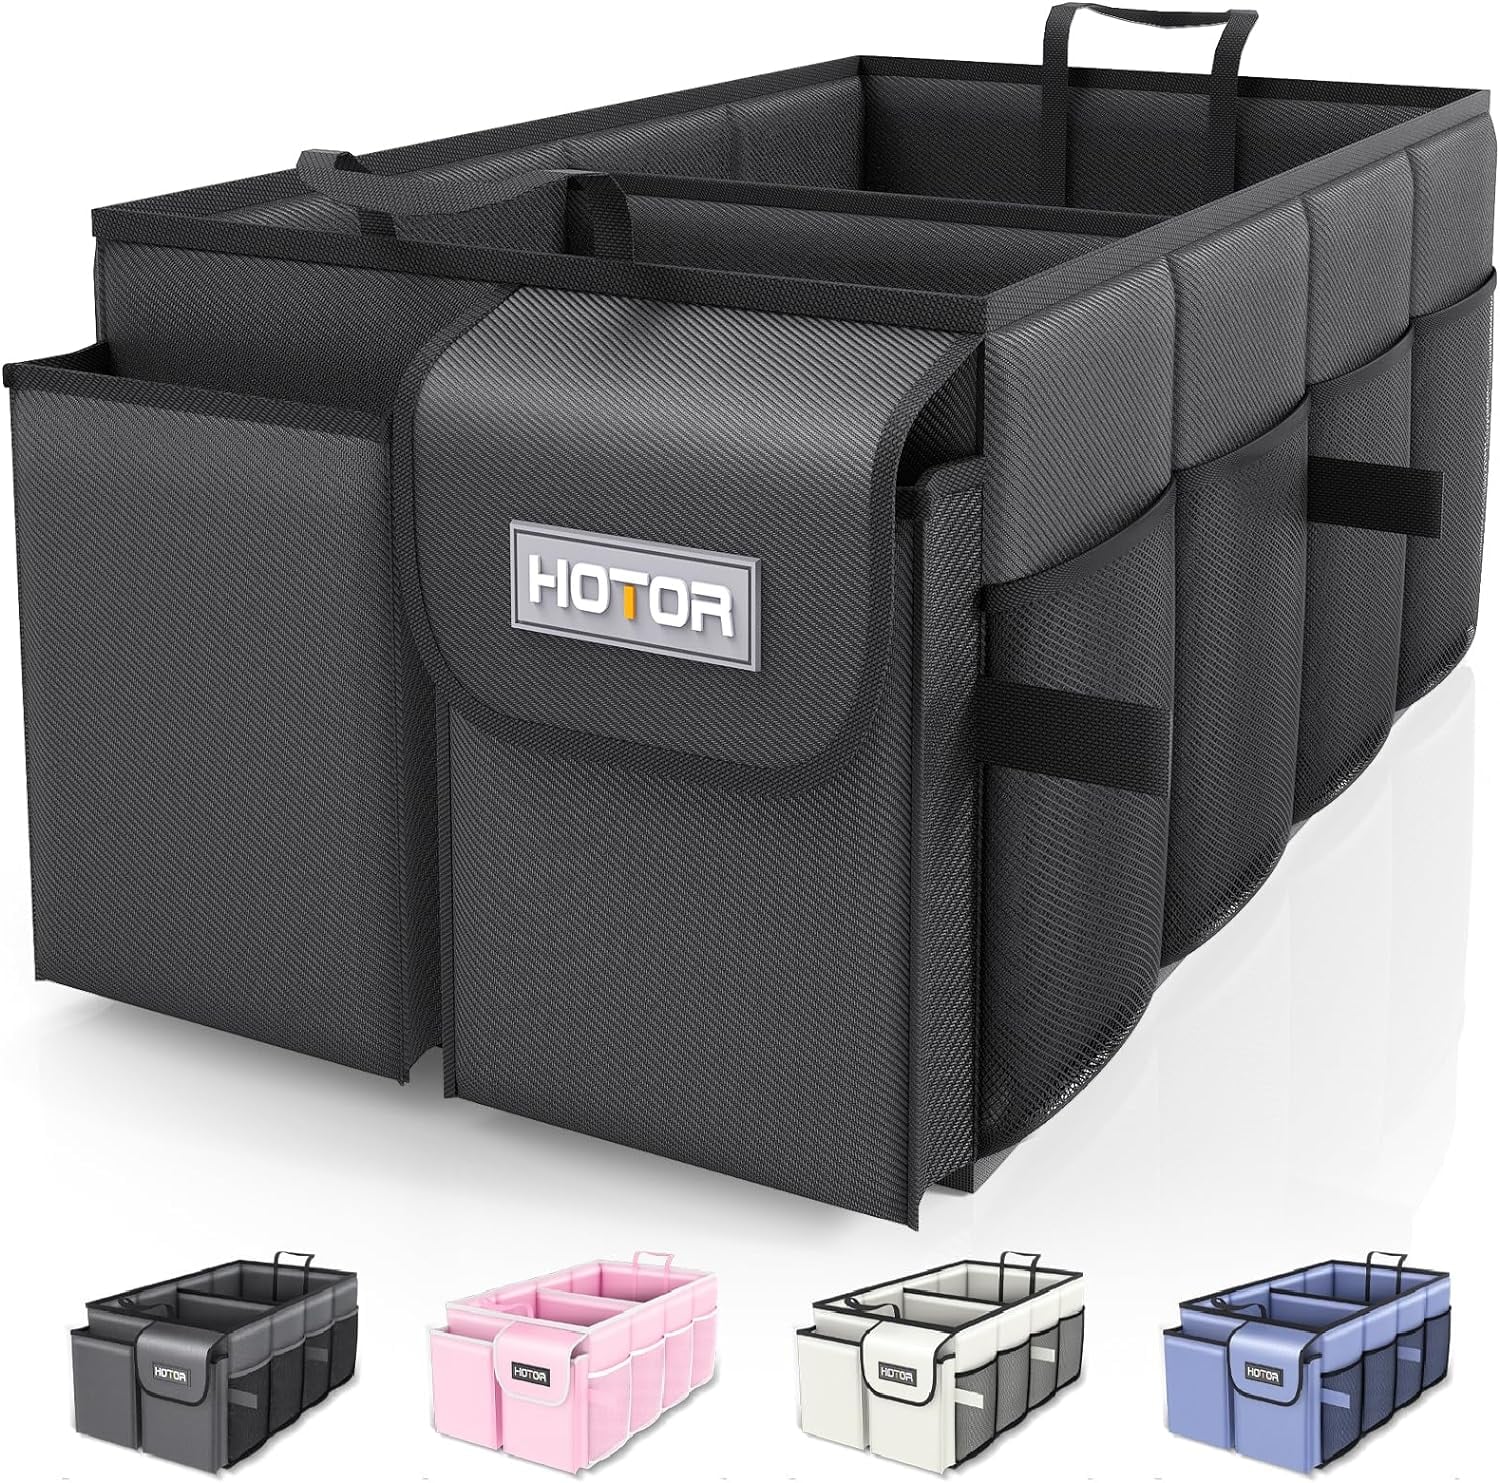 <p><a href="https://www.amazon.com/HOTOR-Trunk-Organizer-Car-Large-Capacity/dp/B0CM6KVCSX">BUY NOW</a></p><p>$13</p><p><a href="https://www.amazon.com/HOTOR-Trunk-Organizer-Car-Large-Capacity/dp/B0CM6KVCSX" class="ga-track"><strong>HOTOR Trunk Organizer</strong></a> ($13, originally $20)</p> <p>Place extra snacks and clutter in a trunk organizer. This large-capacity option has two compartments and six pockets total. It's also collapsible and easy to store when you don't need it.</p>